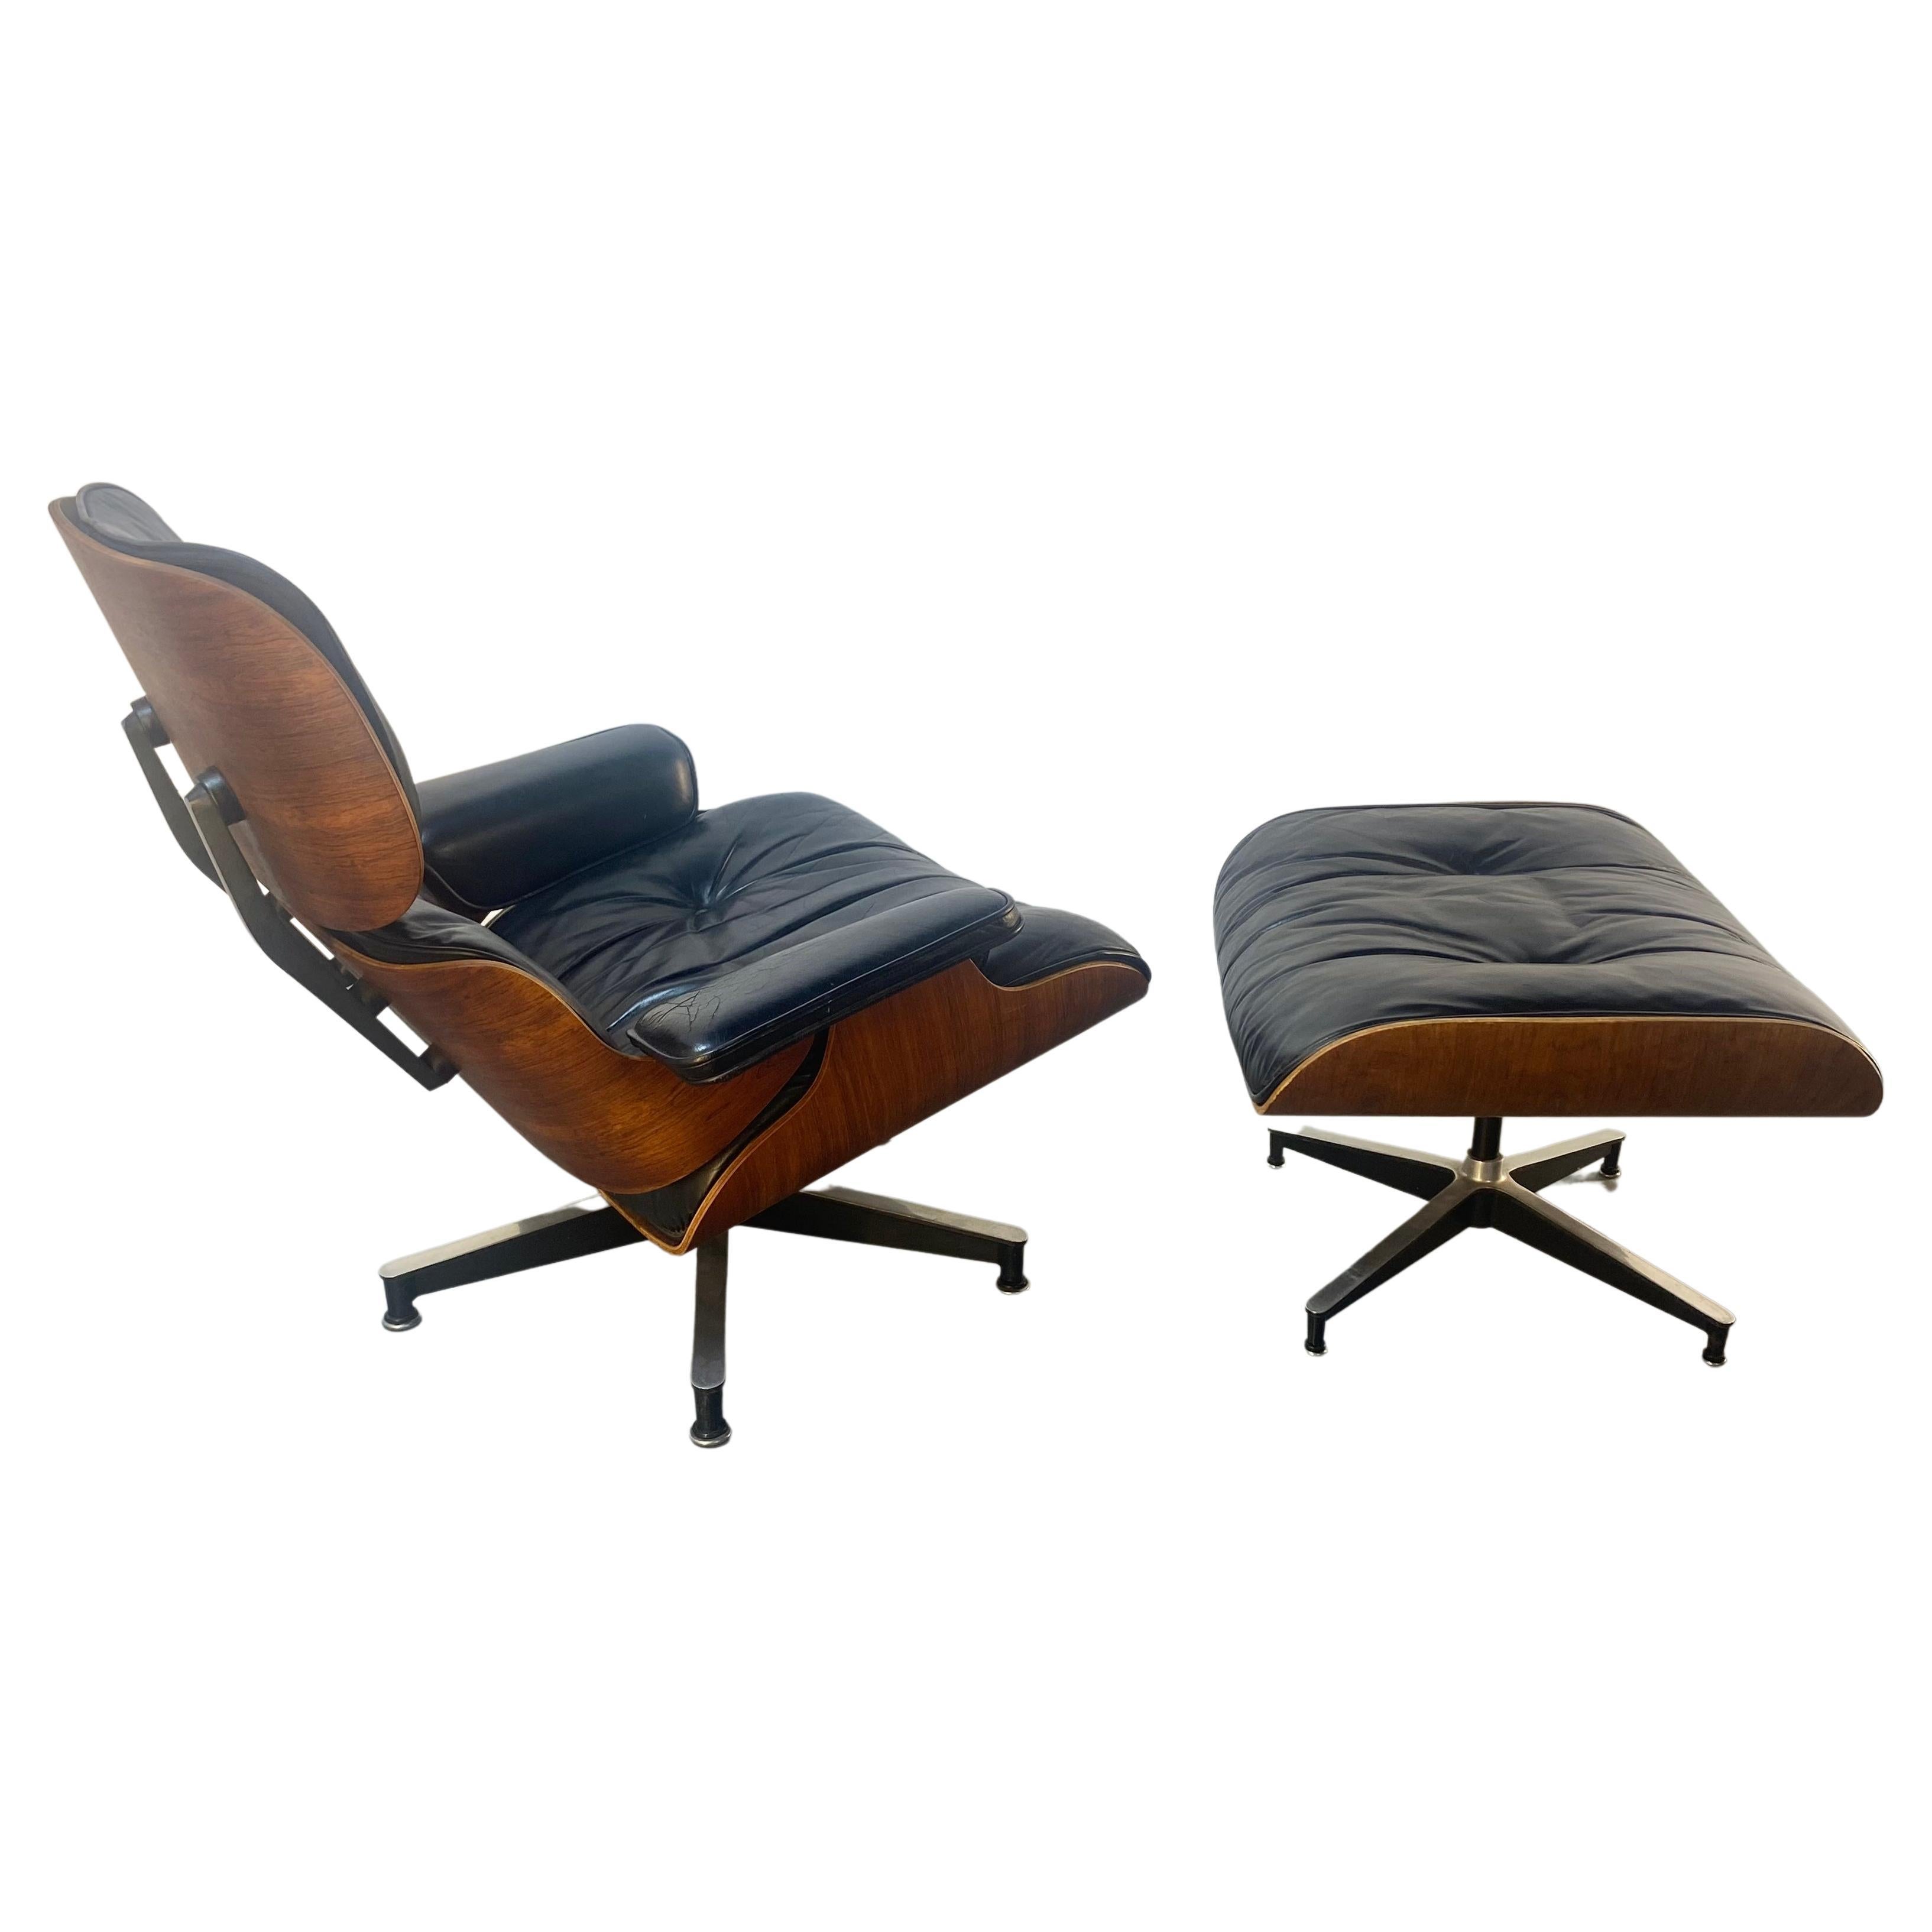 1960s, Herman Miller Eames Lounge Chair and Ottoman, Black Medallion Label